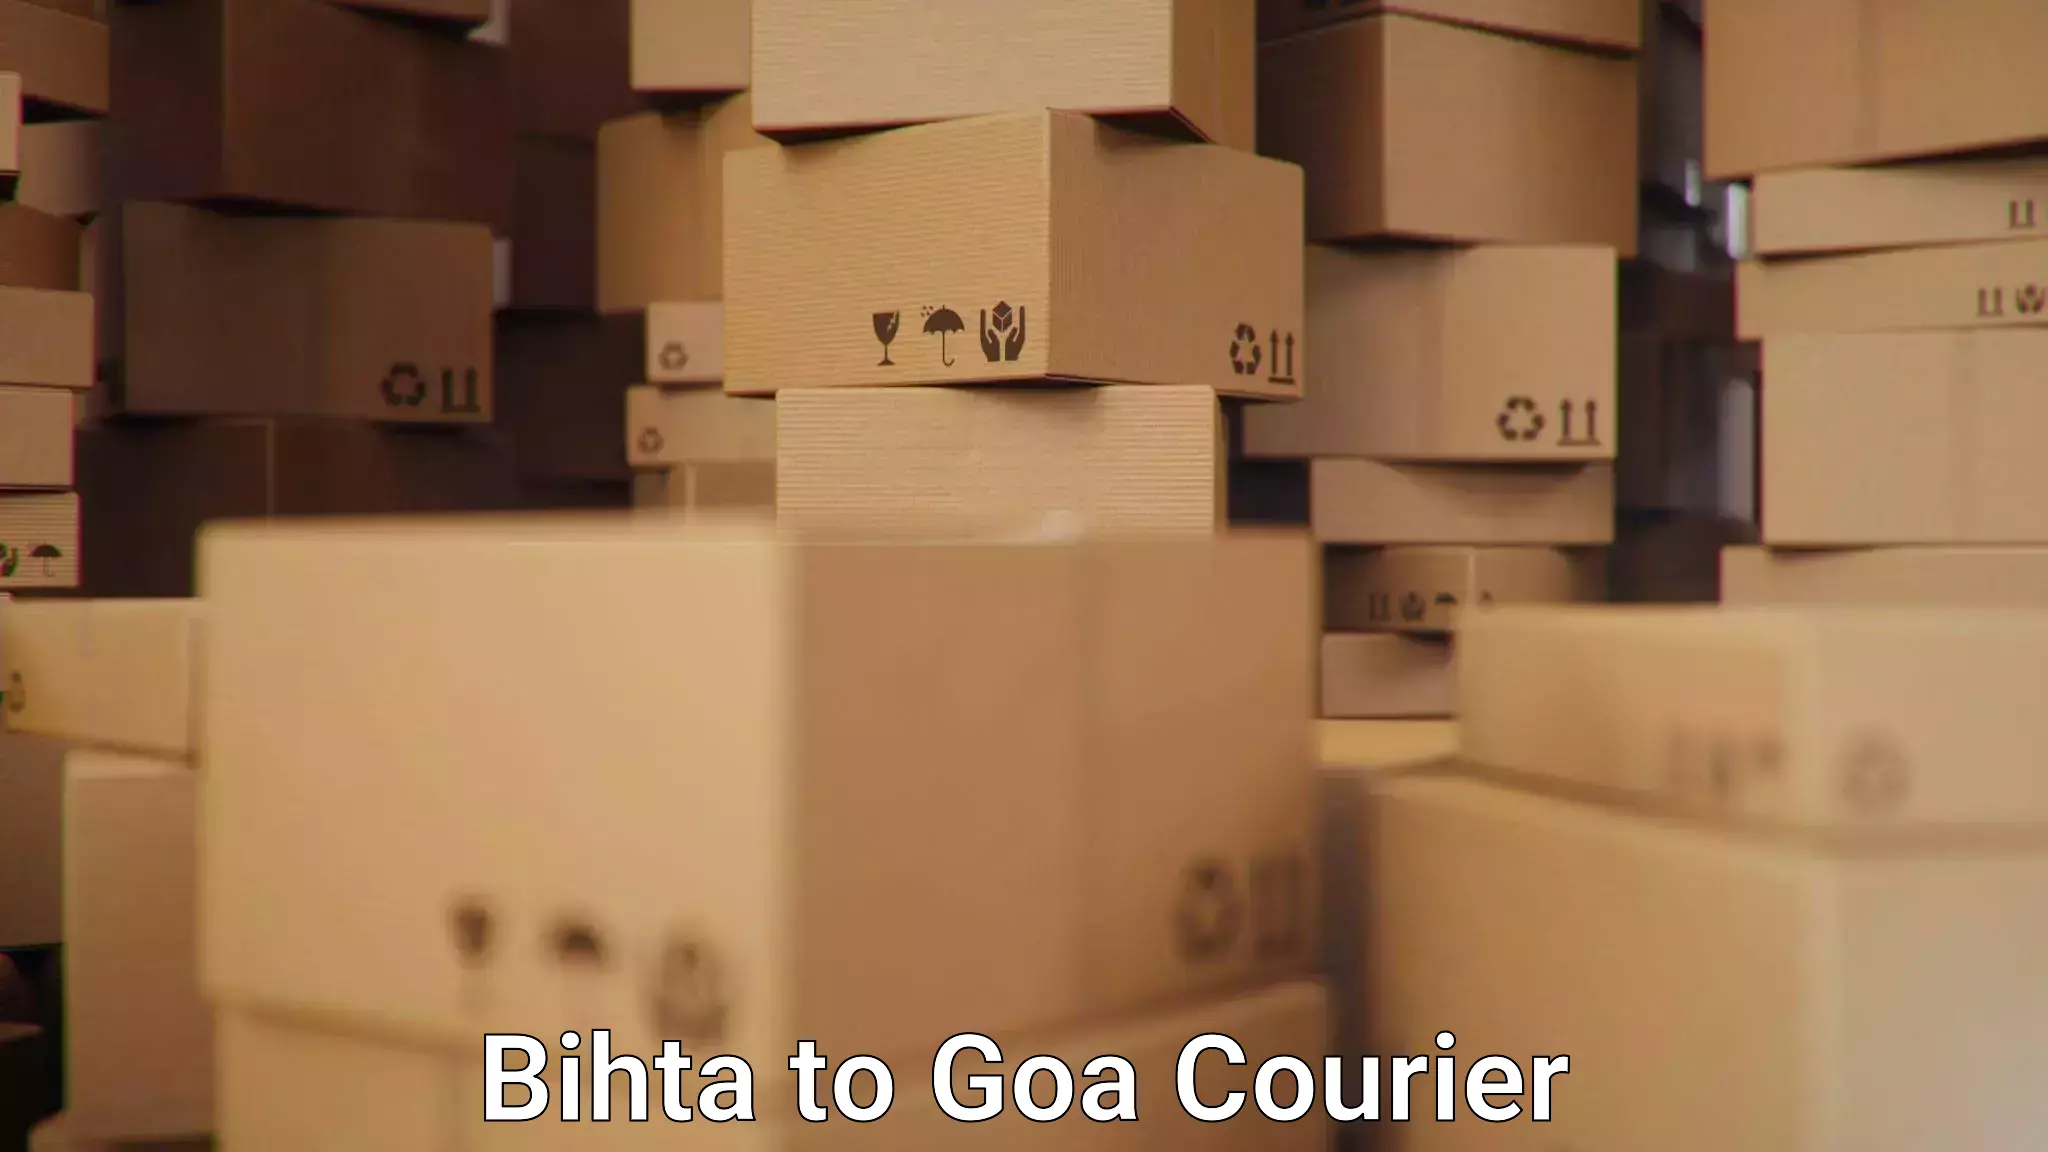 Nationwide delivery network Bihta to Goa